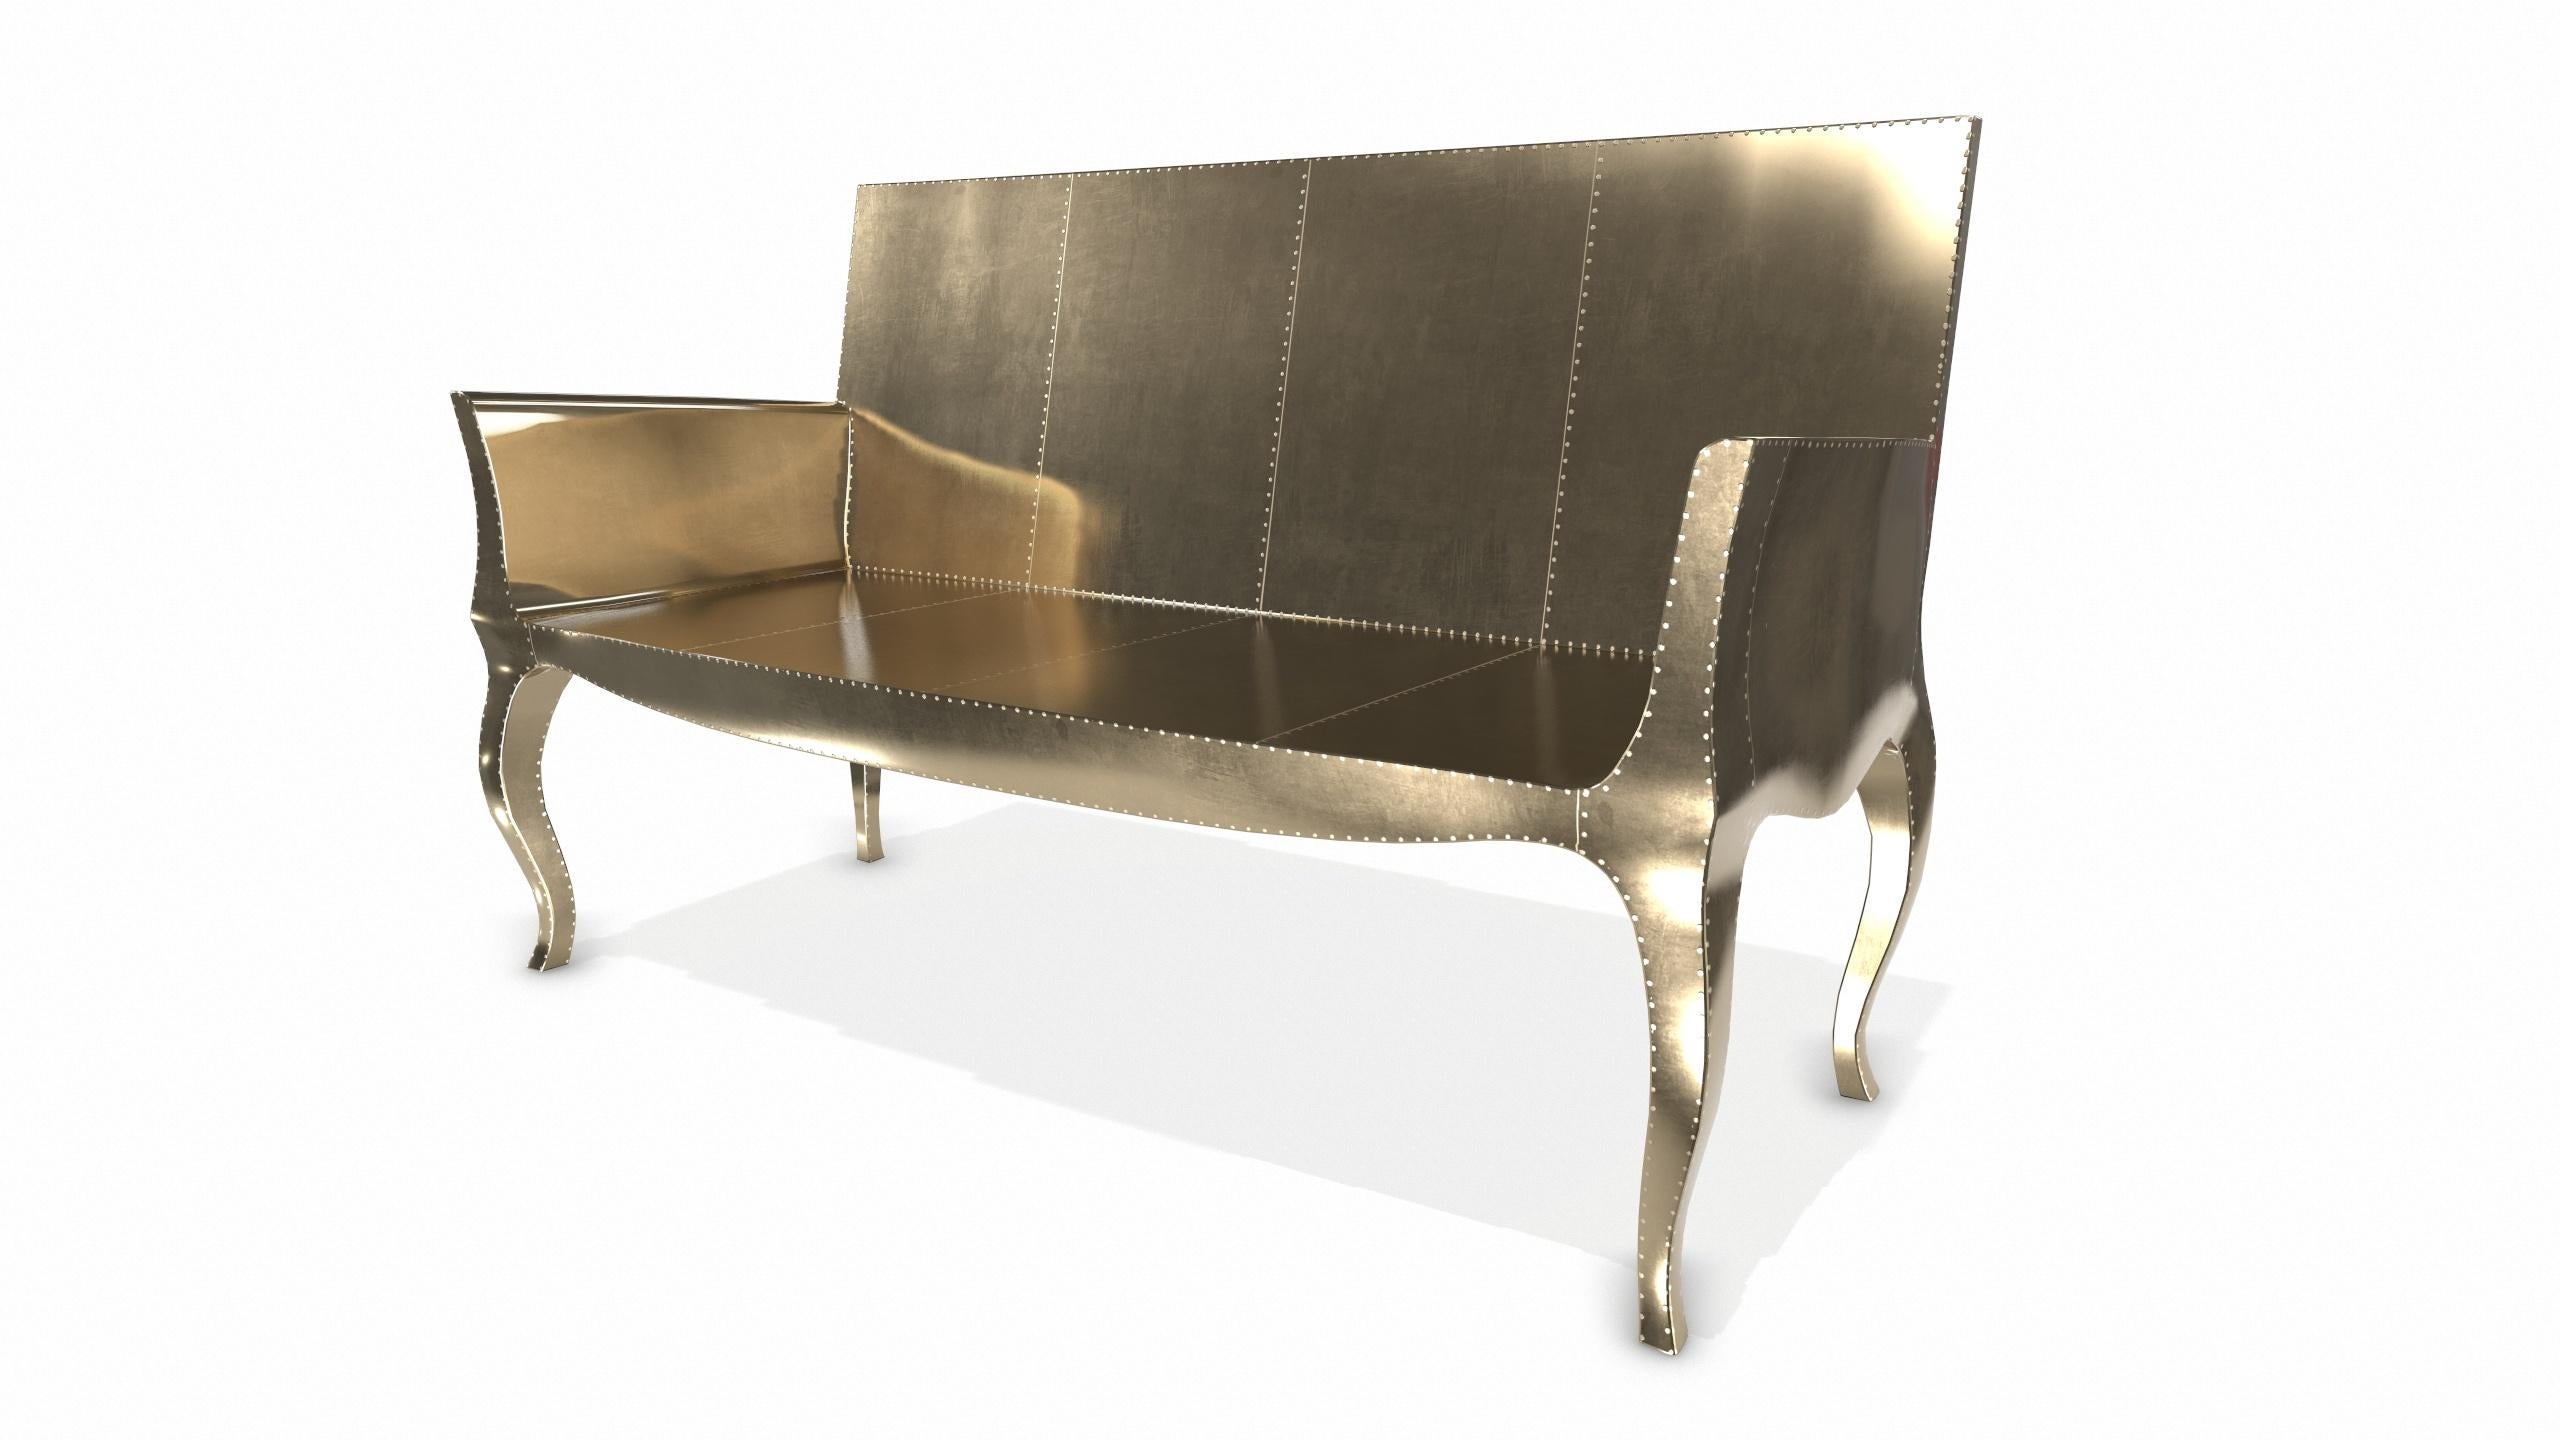 American Louise Settee Art Deco Daybeds in Smooth Brass by Paul Mathieu for S Odegard For Sale